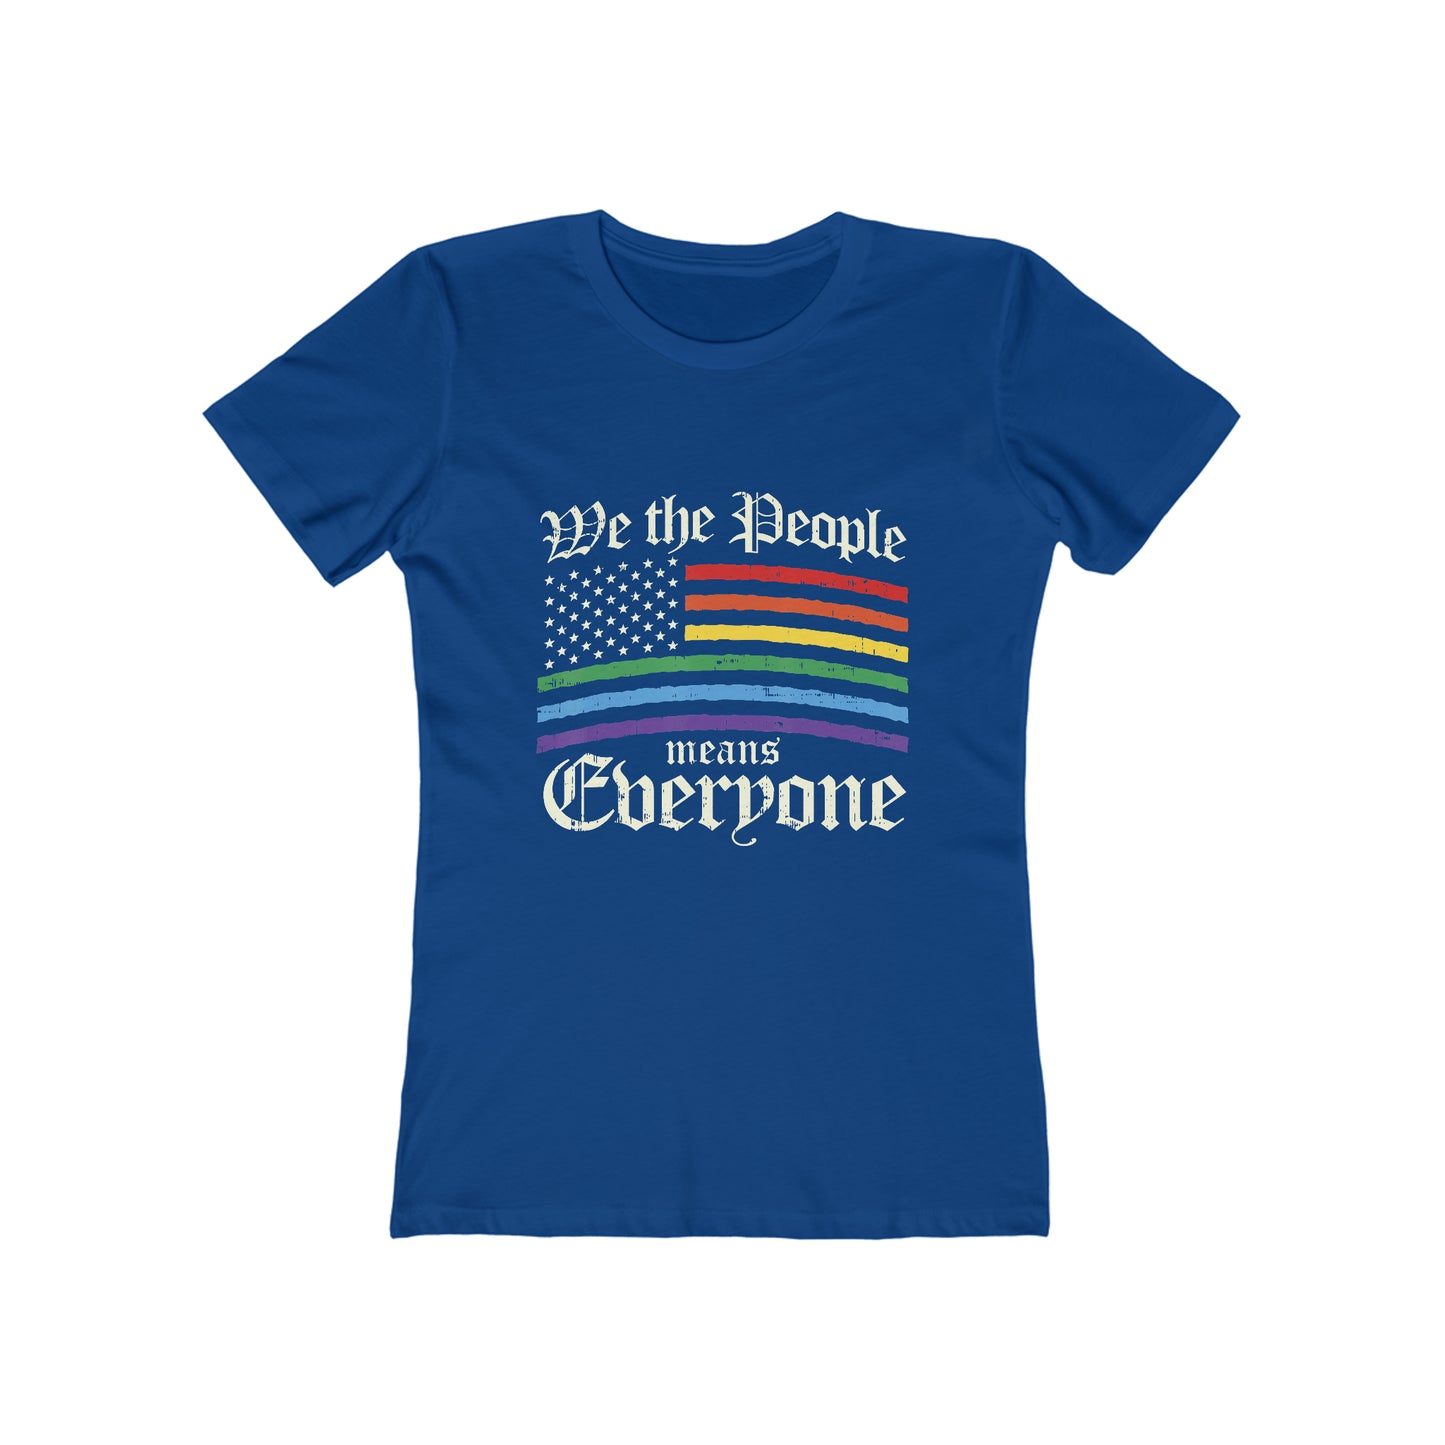 We The People Means Everyone - Women's T-shirt